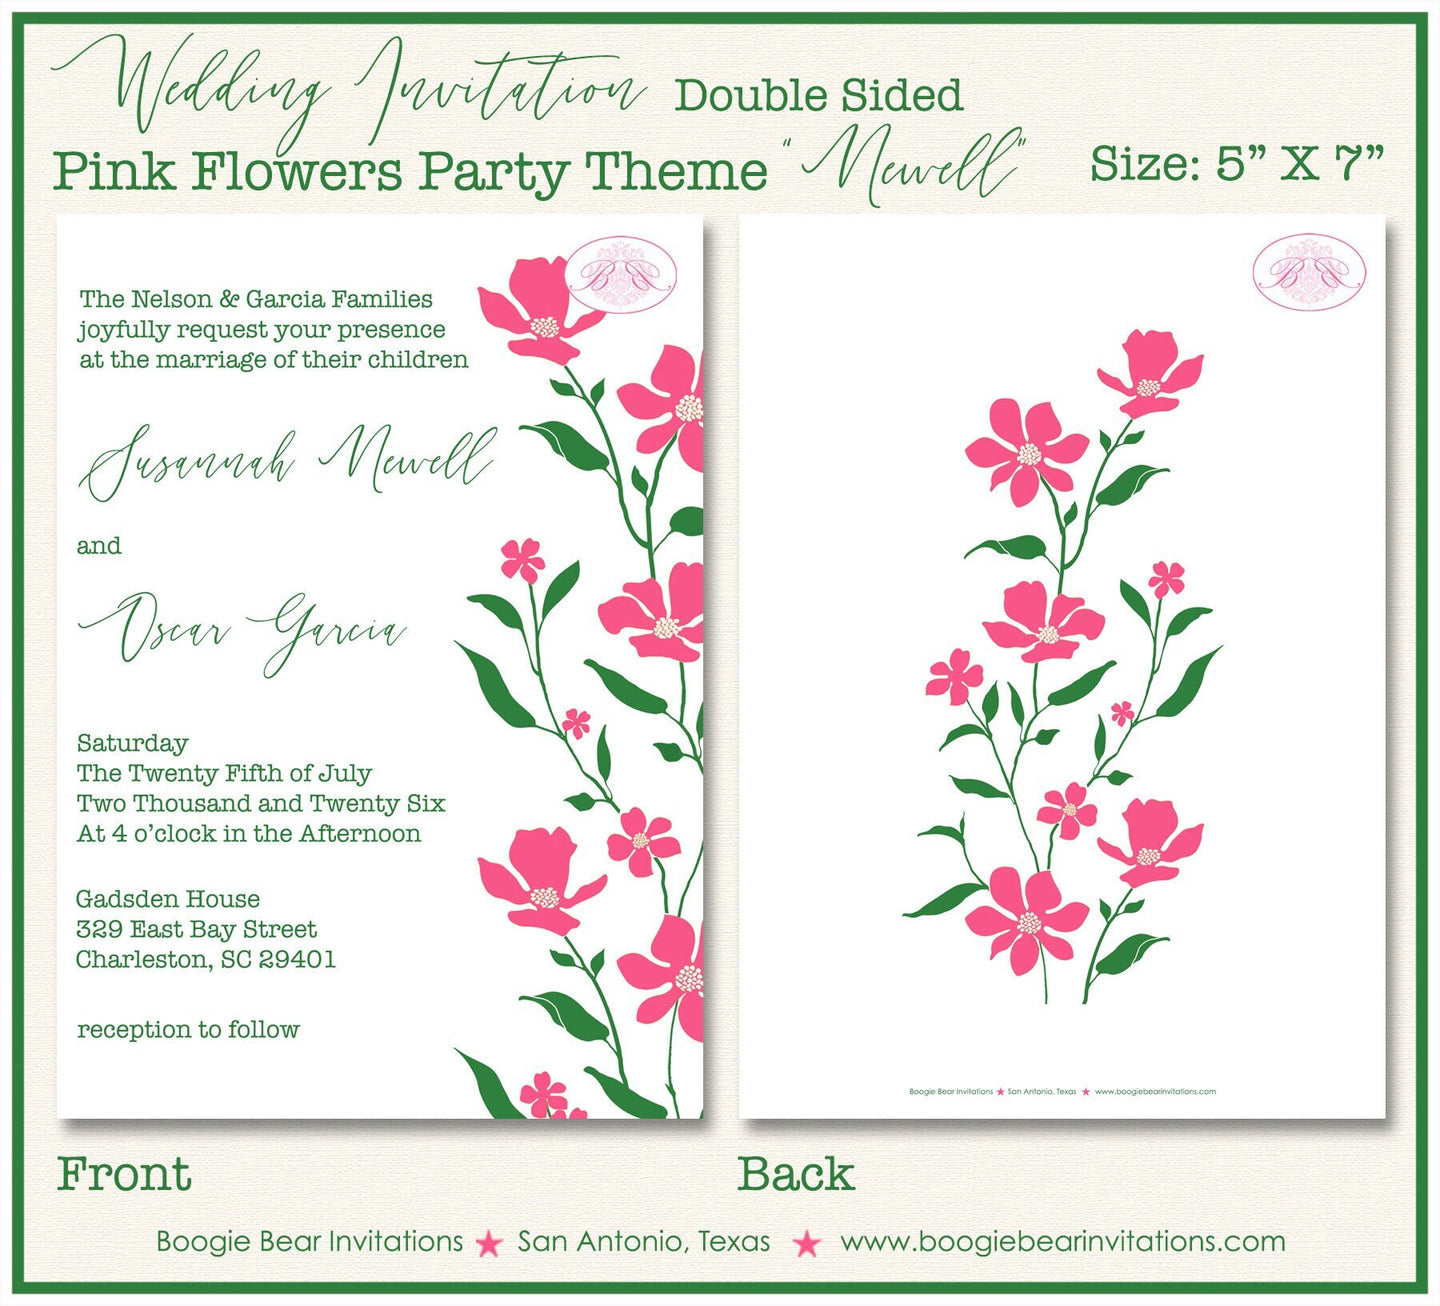 Pink Flowers Wedding Invitation Birthday Party White Green Garden Grow Boogie Bear Invitations Newell Theme Paperless Printable Printed